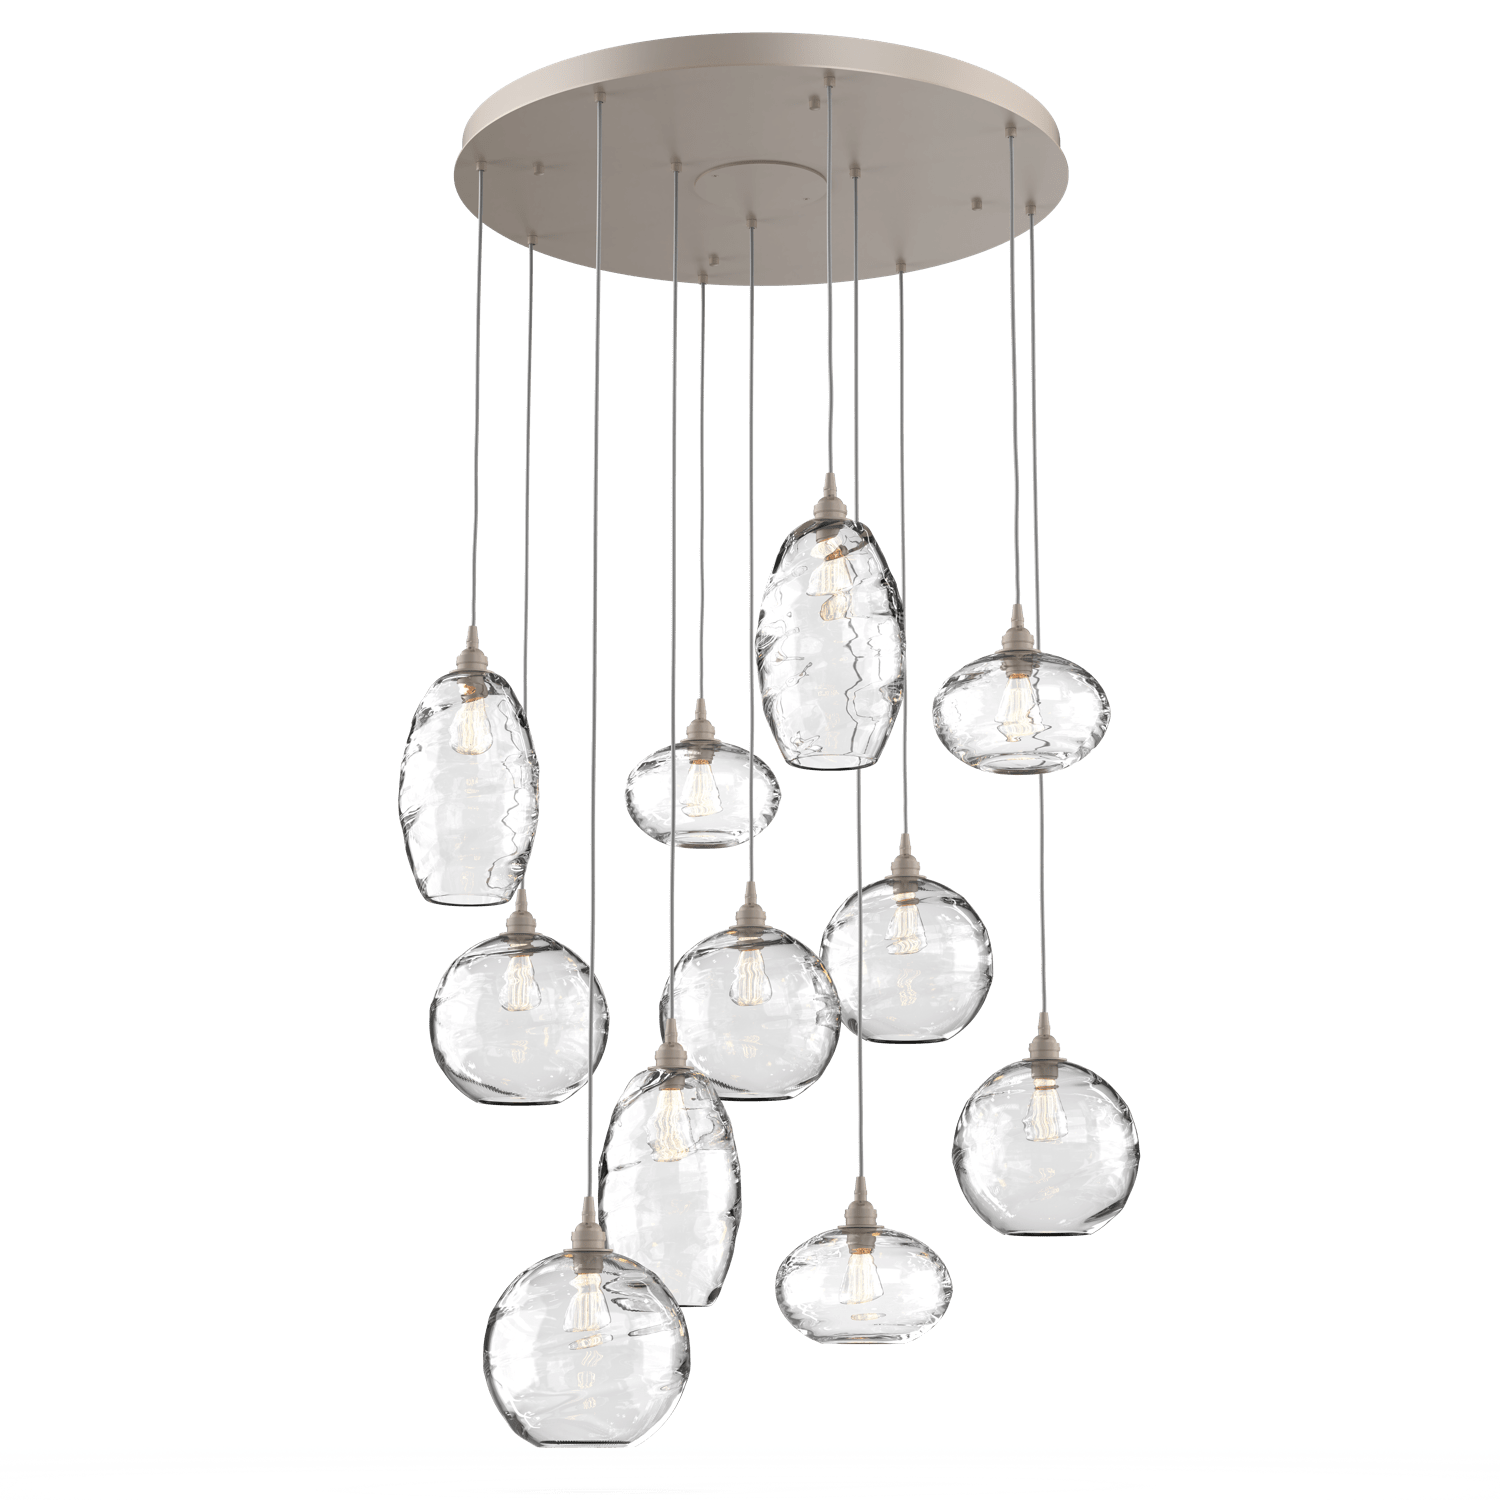 CHB0048-11-BS-OC-Hammerton-Studio-Optic-Blown-Glass-Misto-11-light-round-pendant-chandelier-with-metallic-beige-silver-finish-and-optic-clear-blown-glass-shades-and-incandescent-lamping